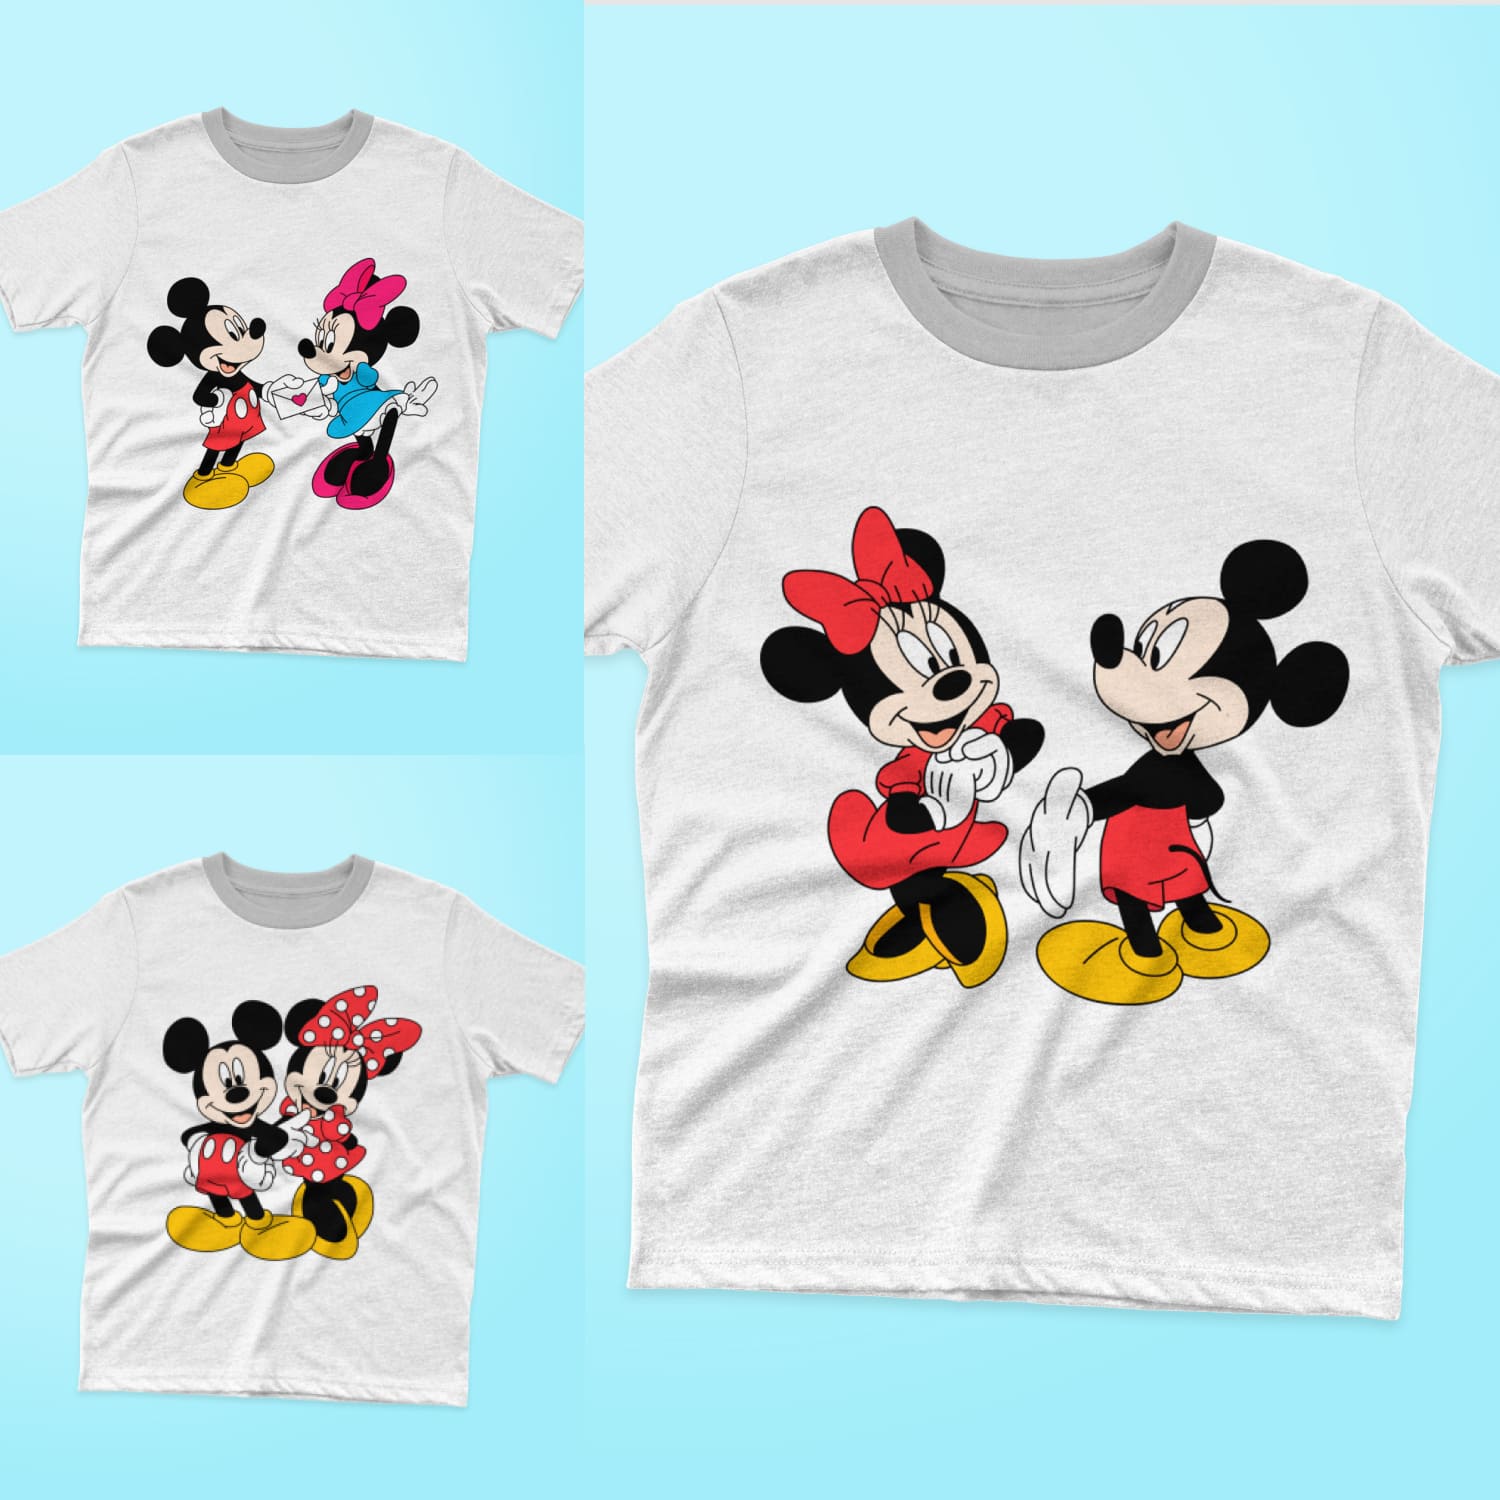 Mickey and Minnie Mouse SVG T-shirt Designs cover.